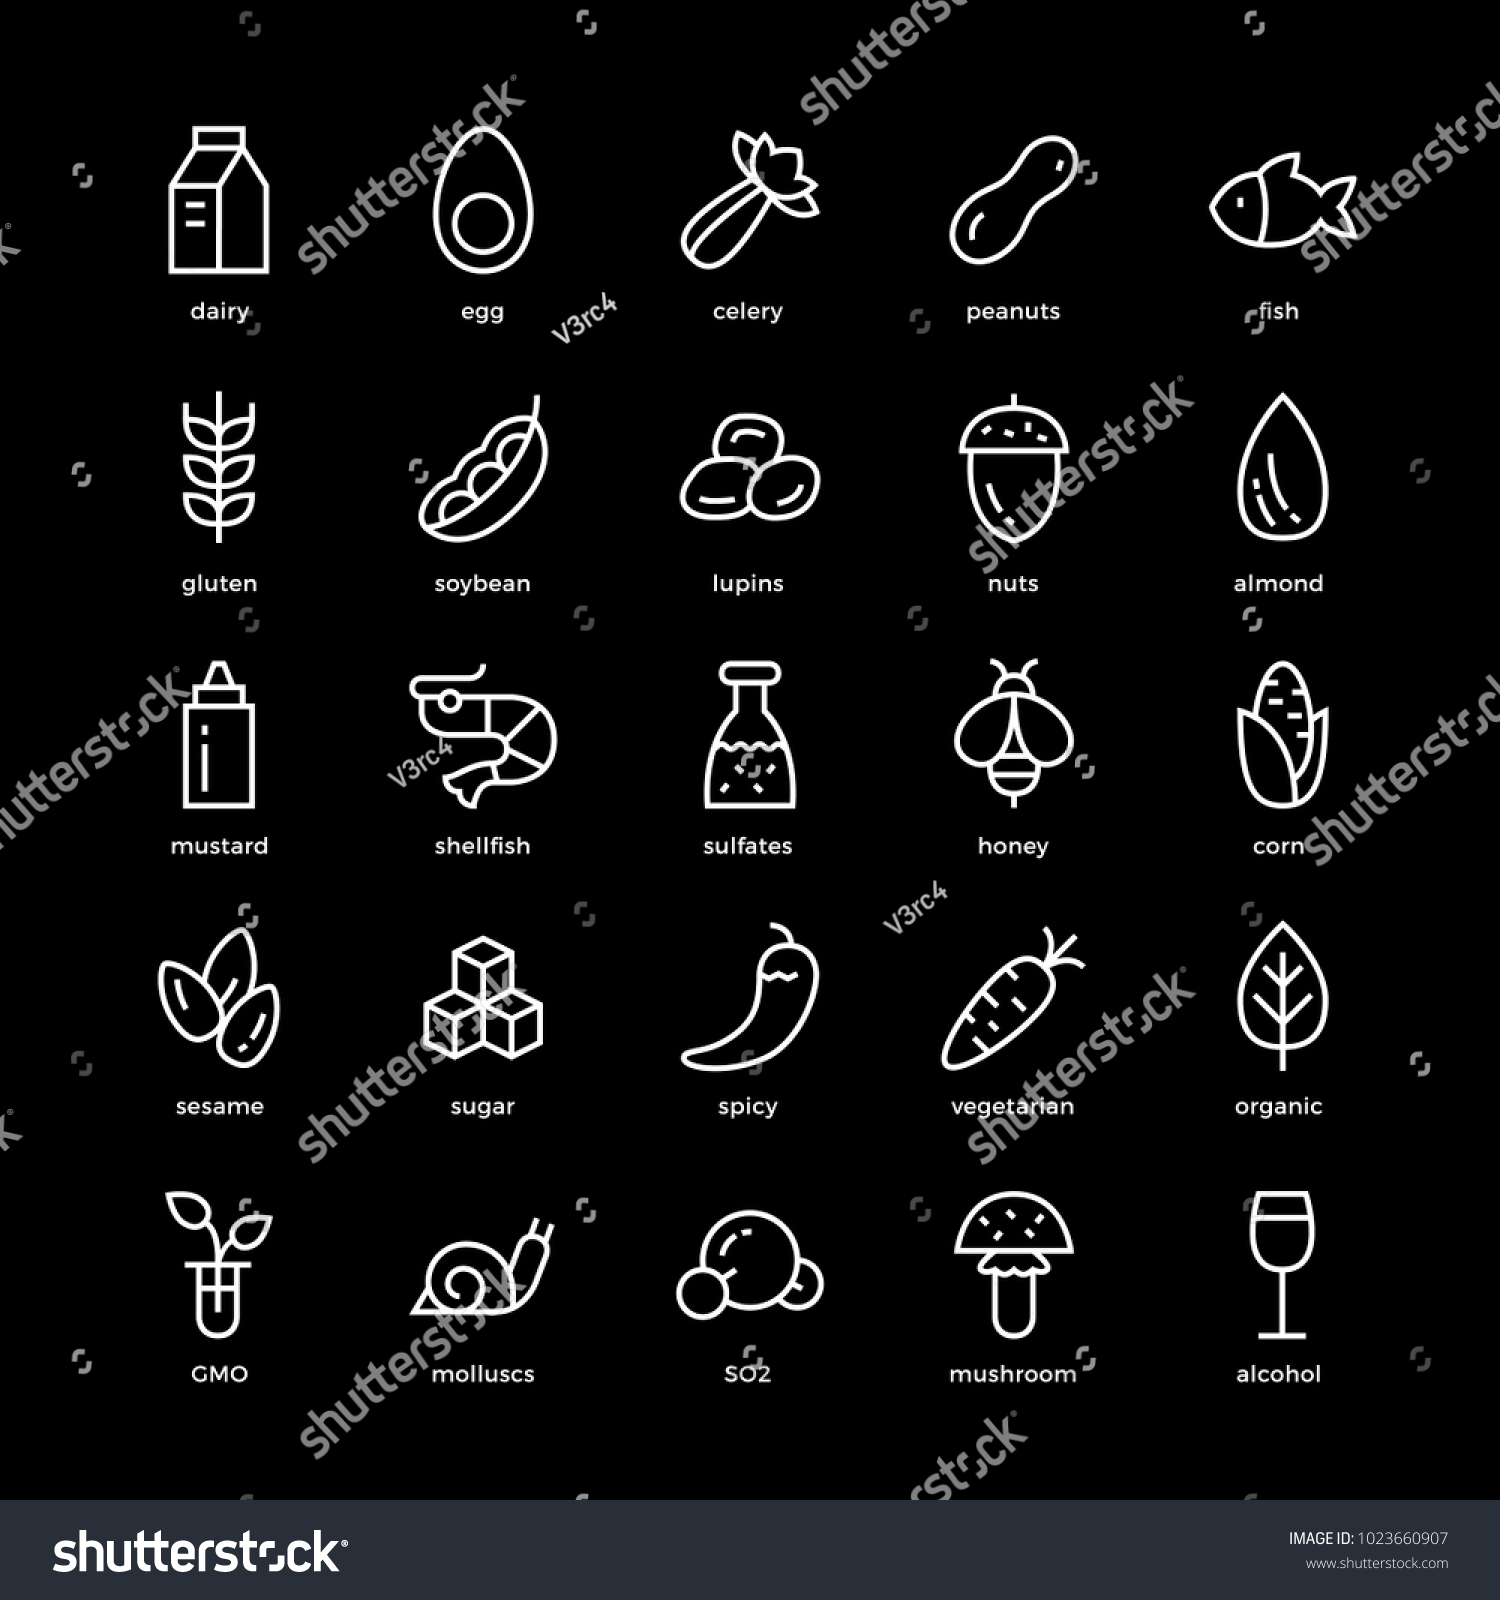 SVG of 25 basic allergens and diet line icons set. Isolated on black background. svg